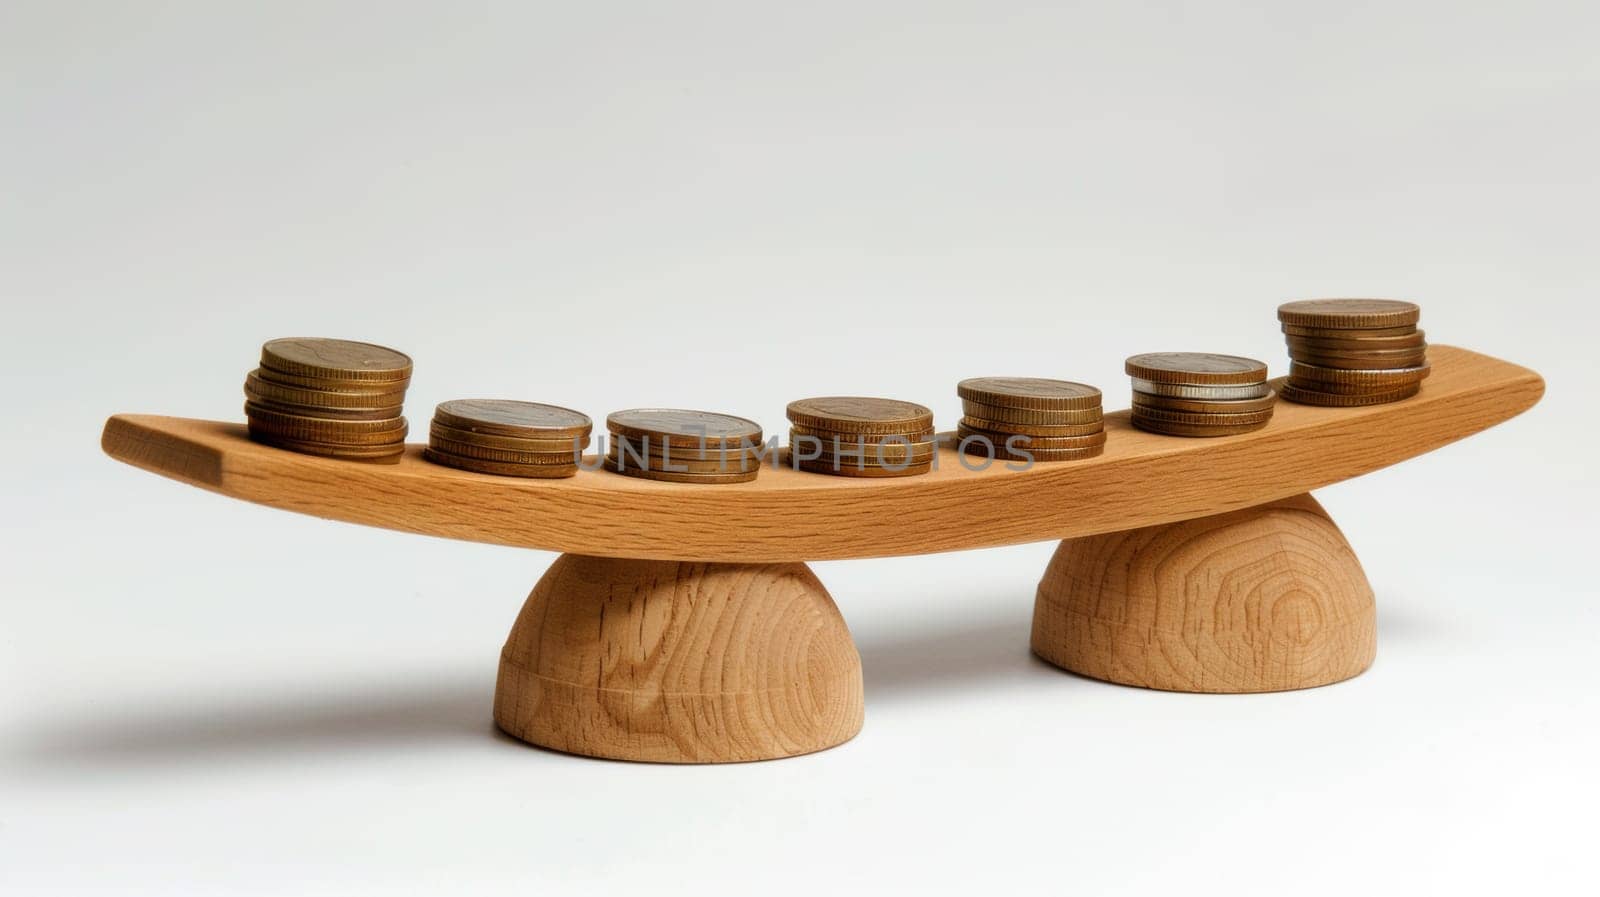 A wooden coin balance with coins stacked on top of each other